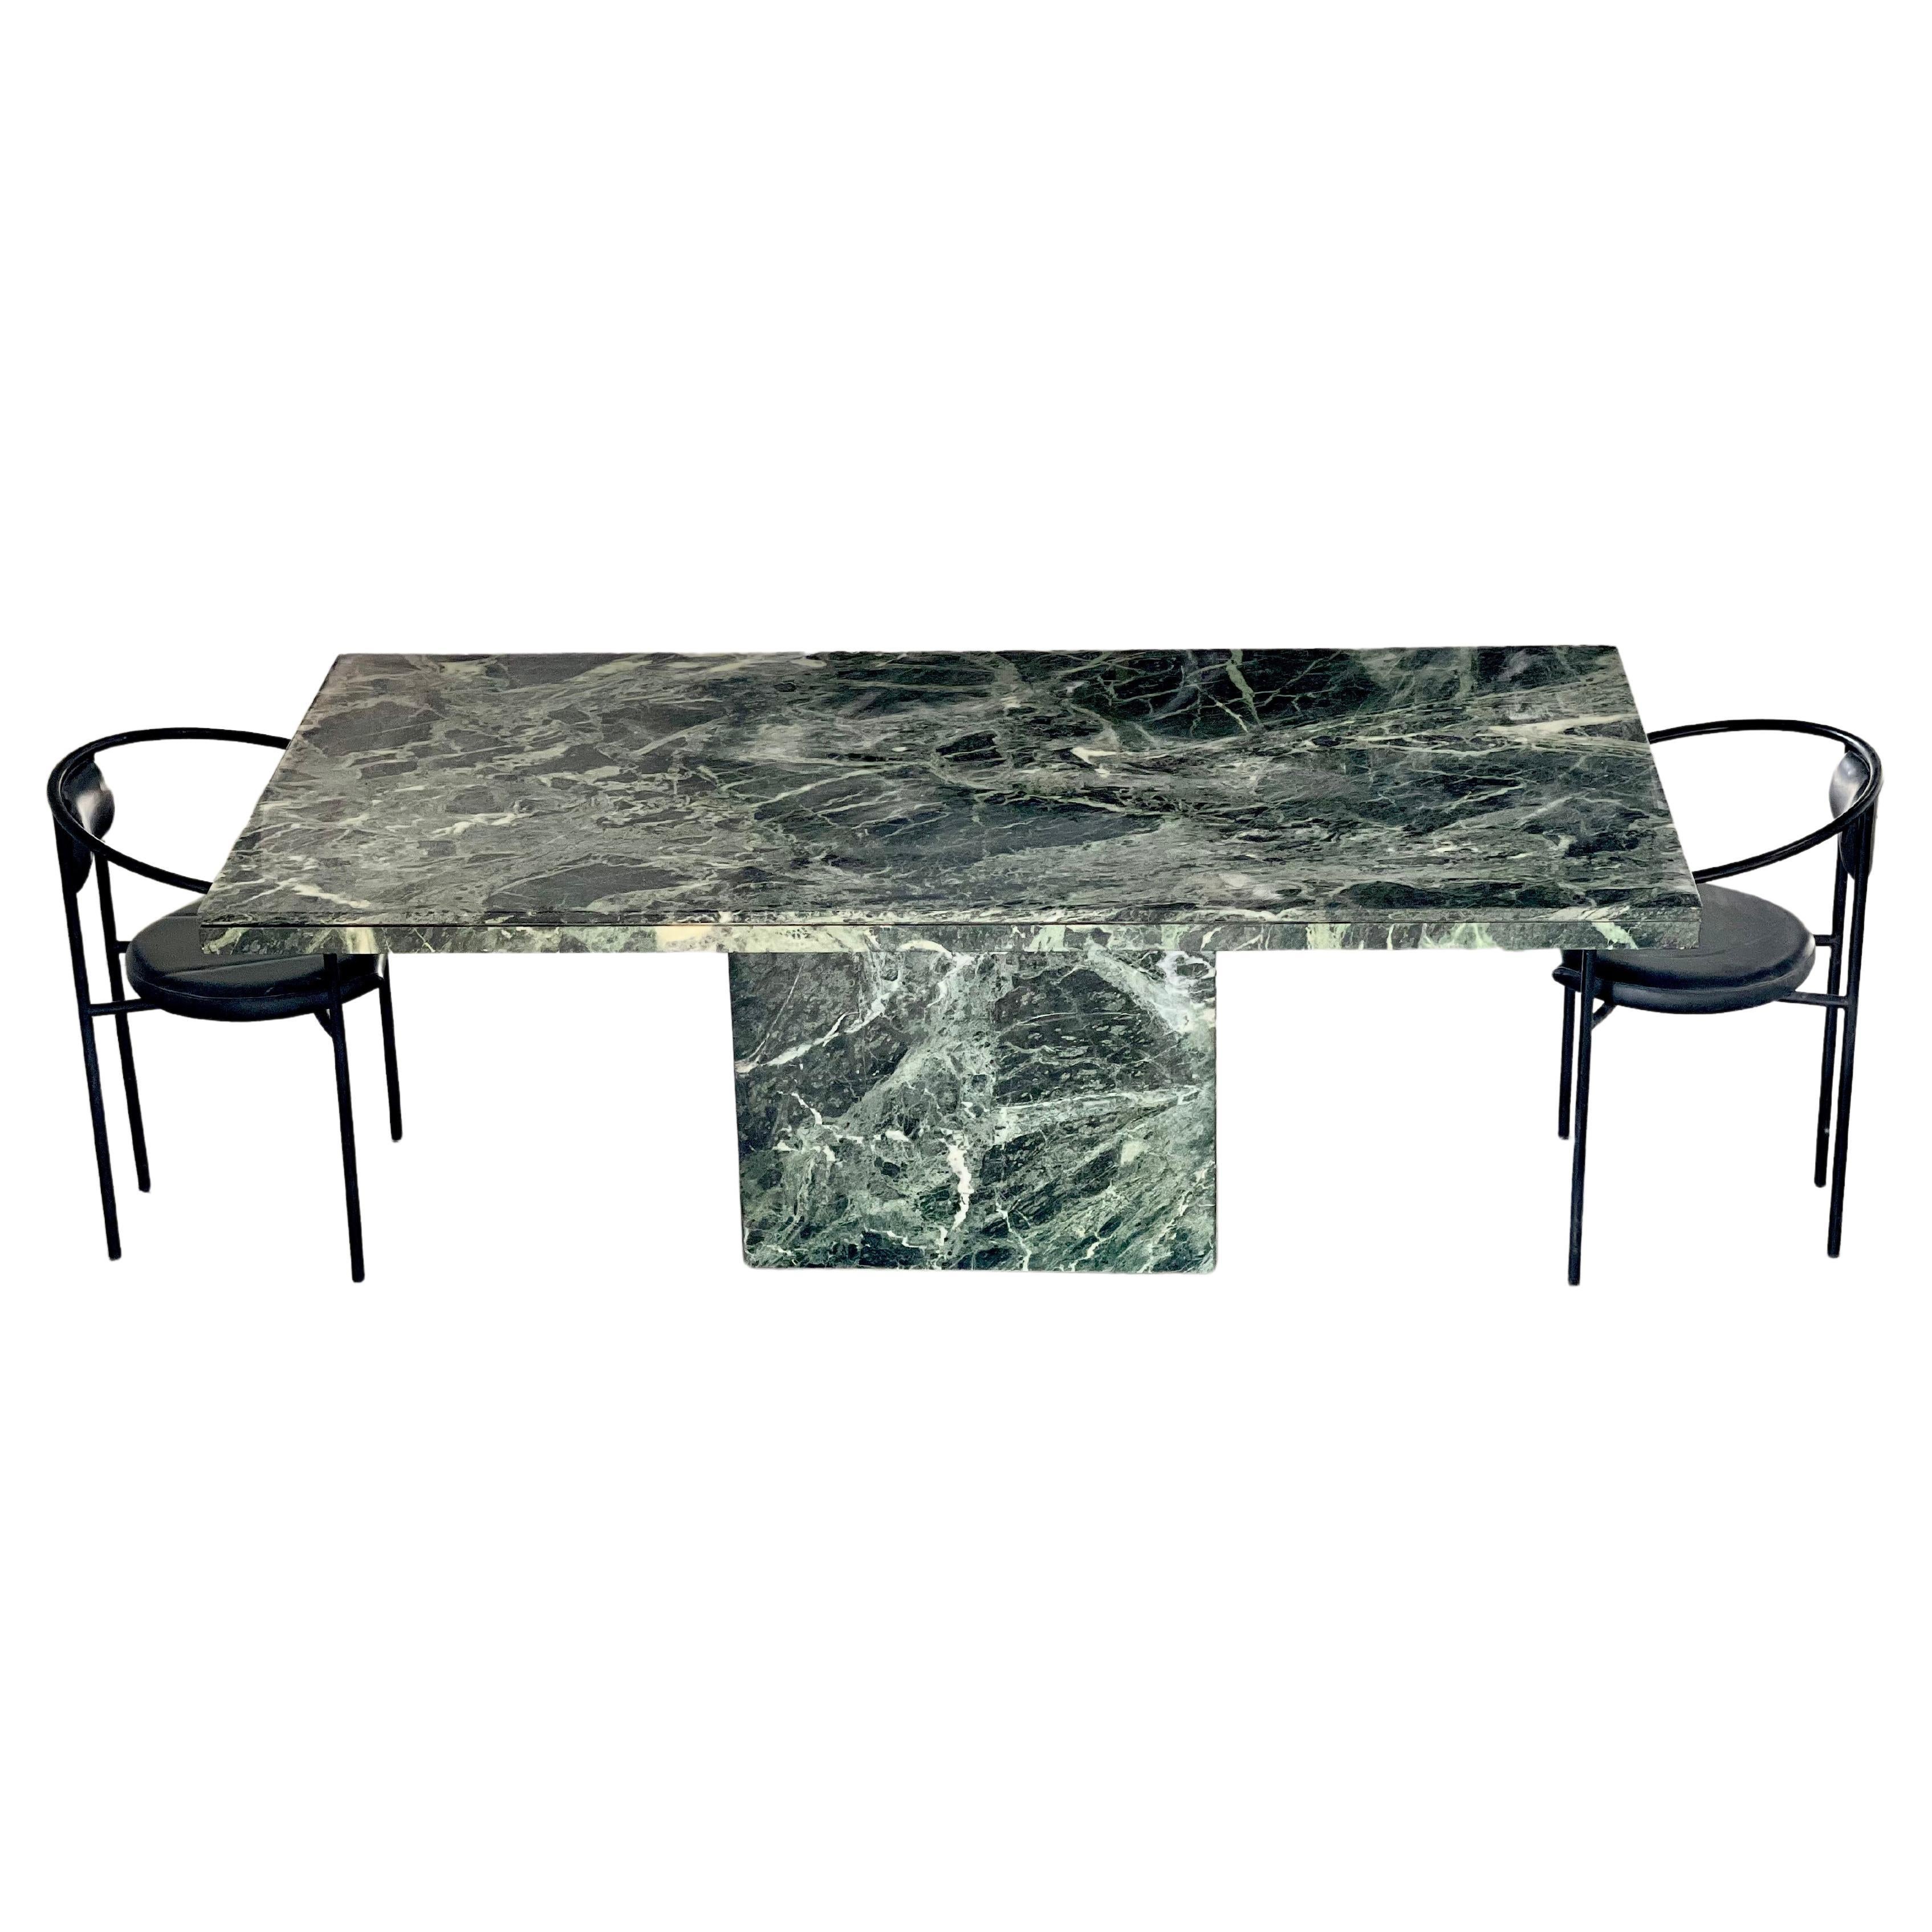 Vintage Green Serpentine Marble Dining Table